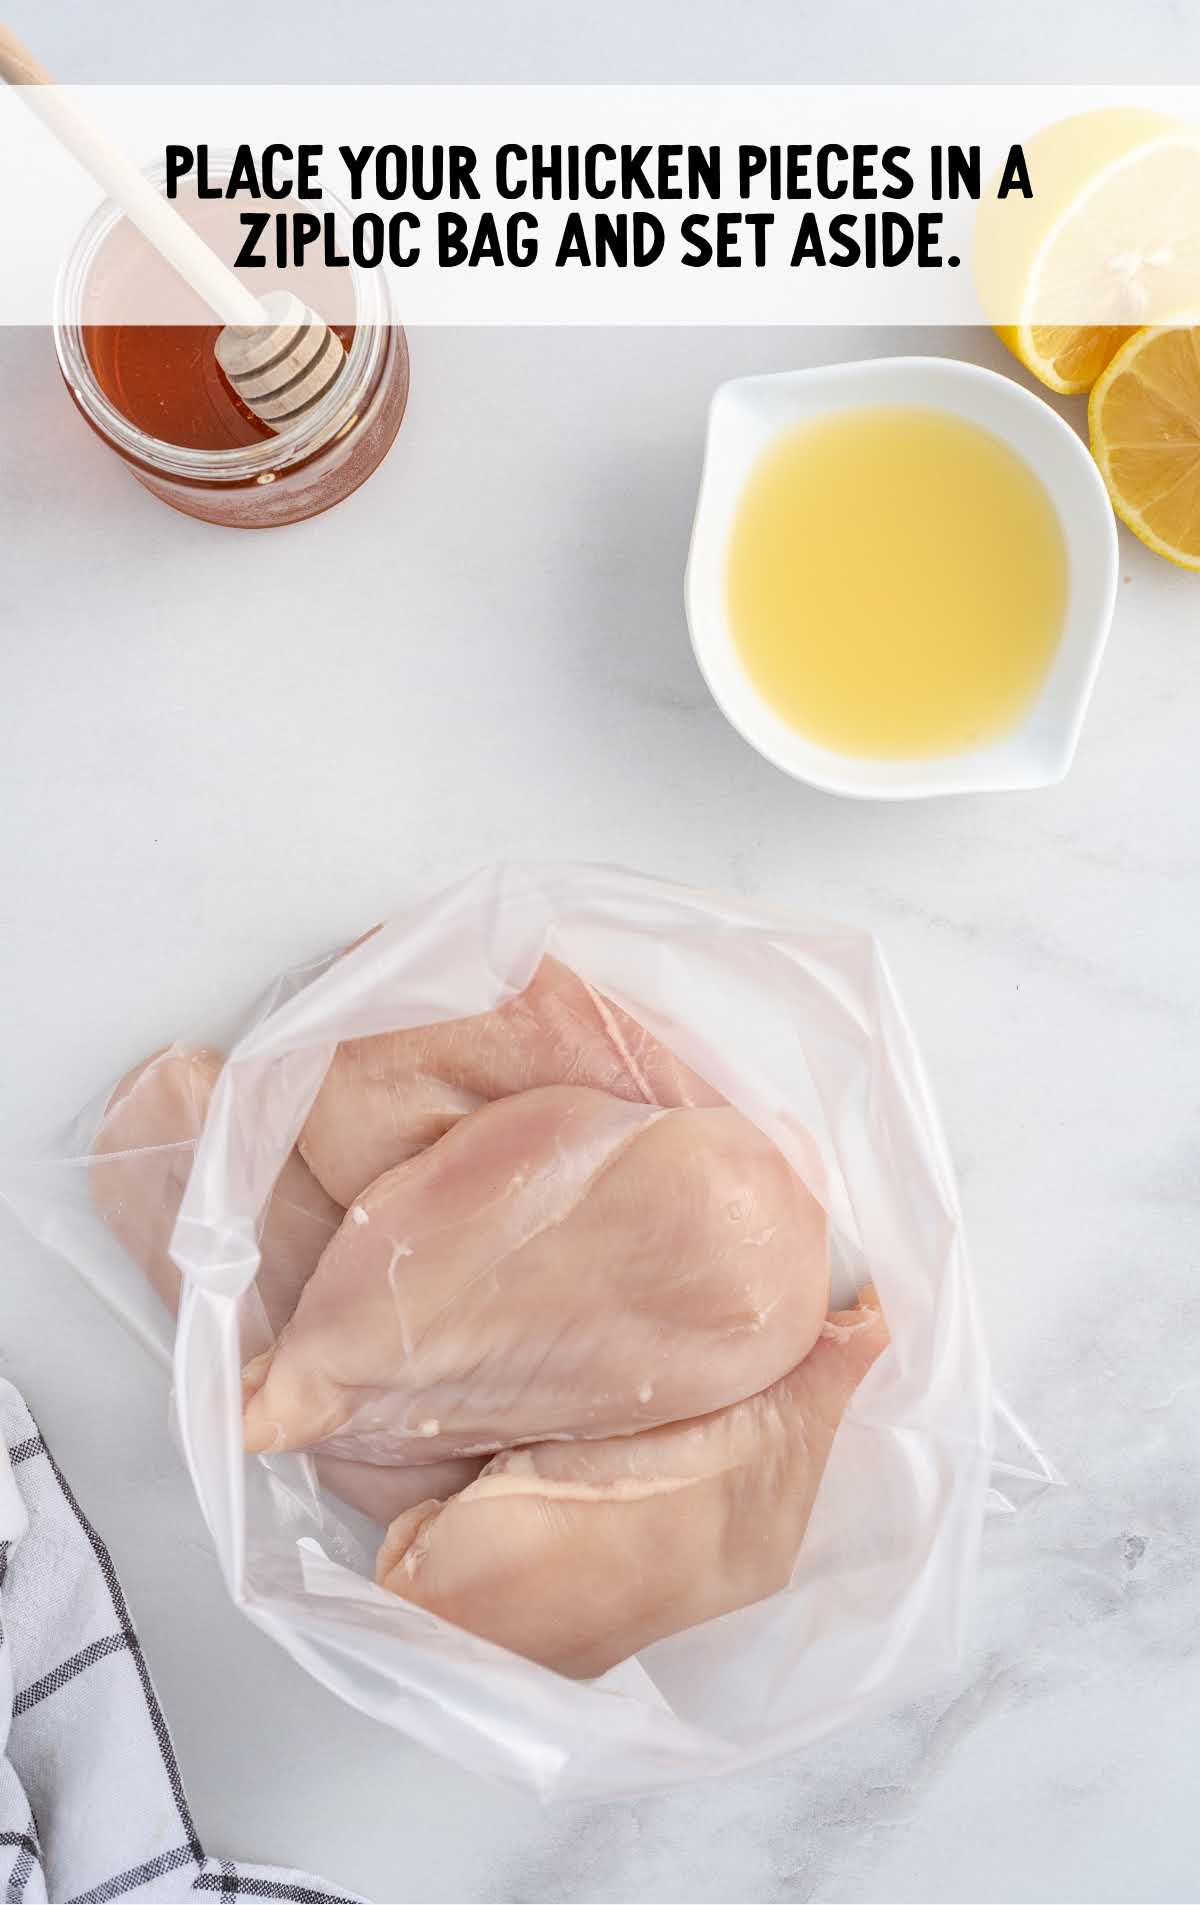 chicken breast pounded in a ziploc bag